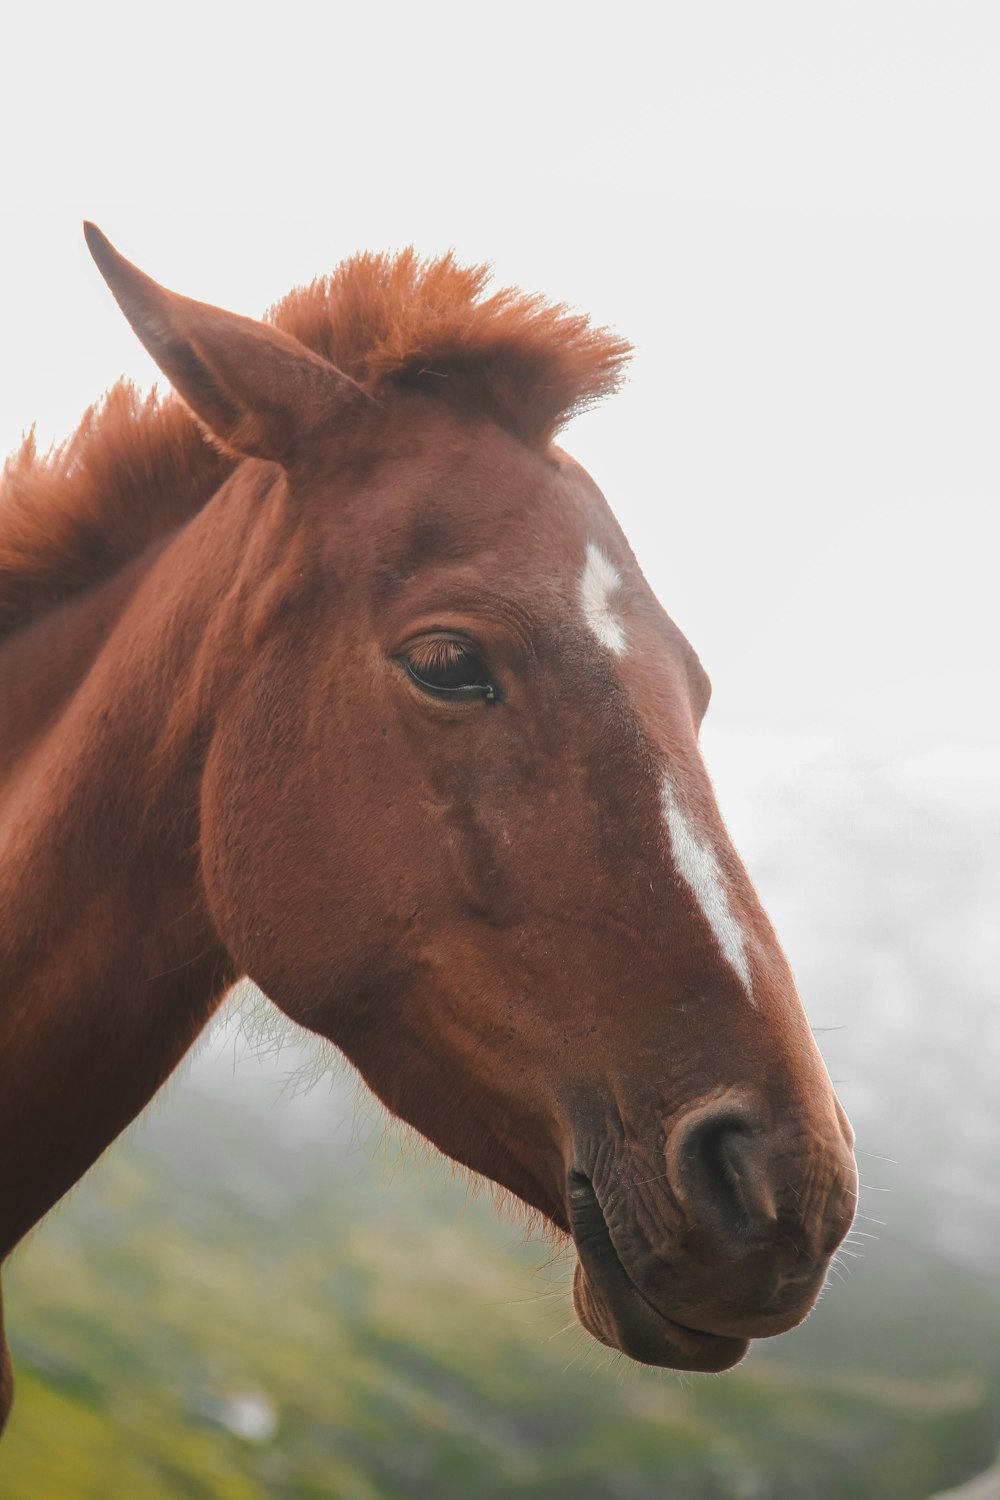 a brown horse with a white spot on its head